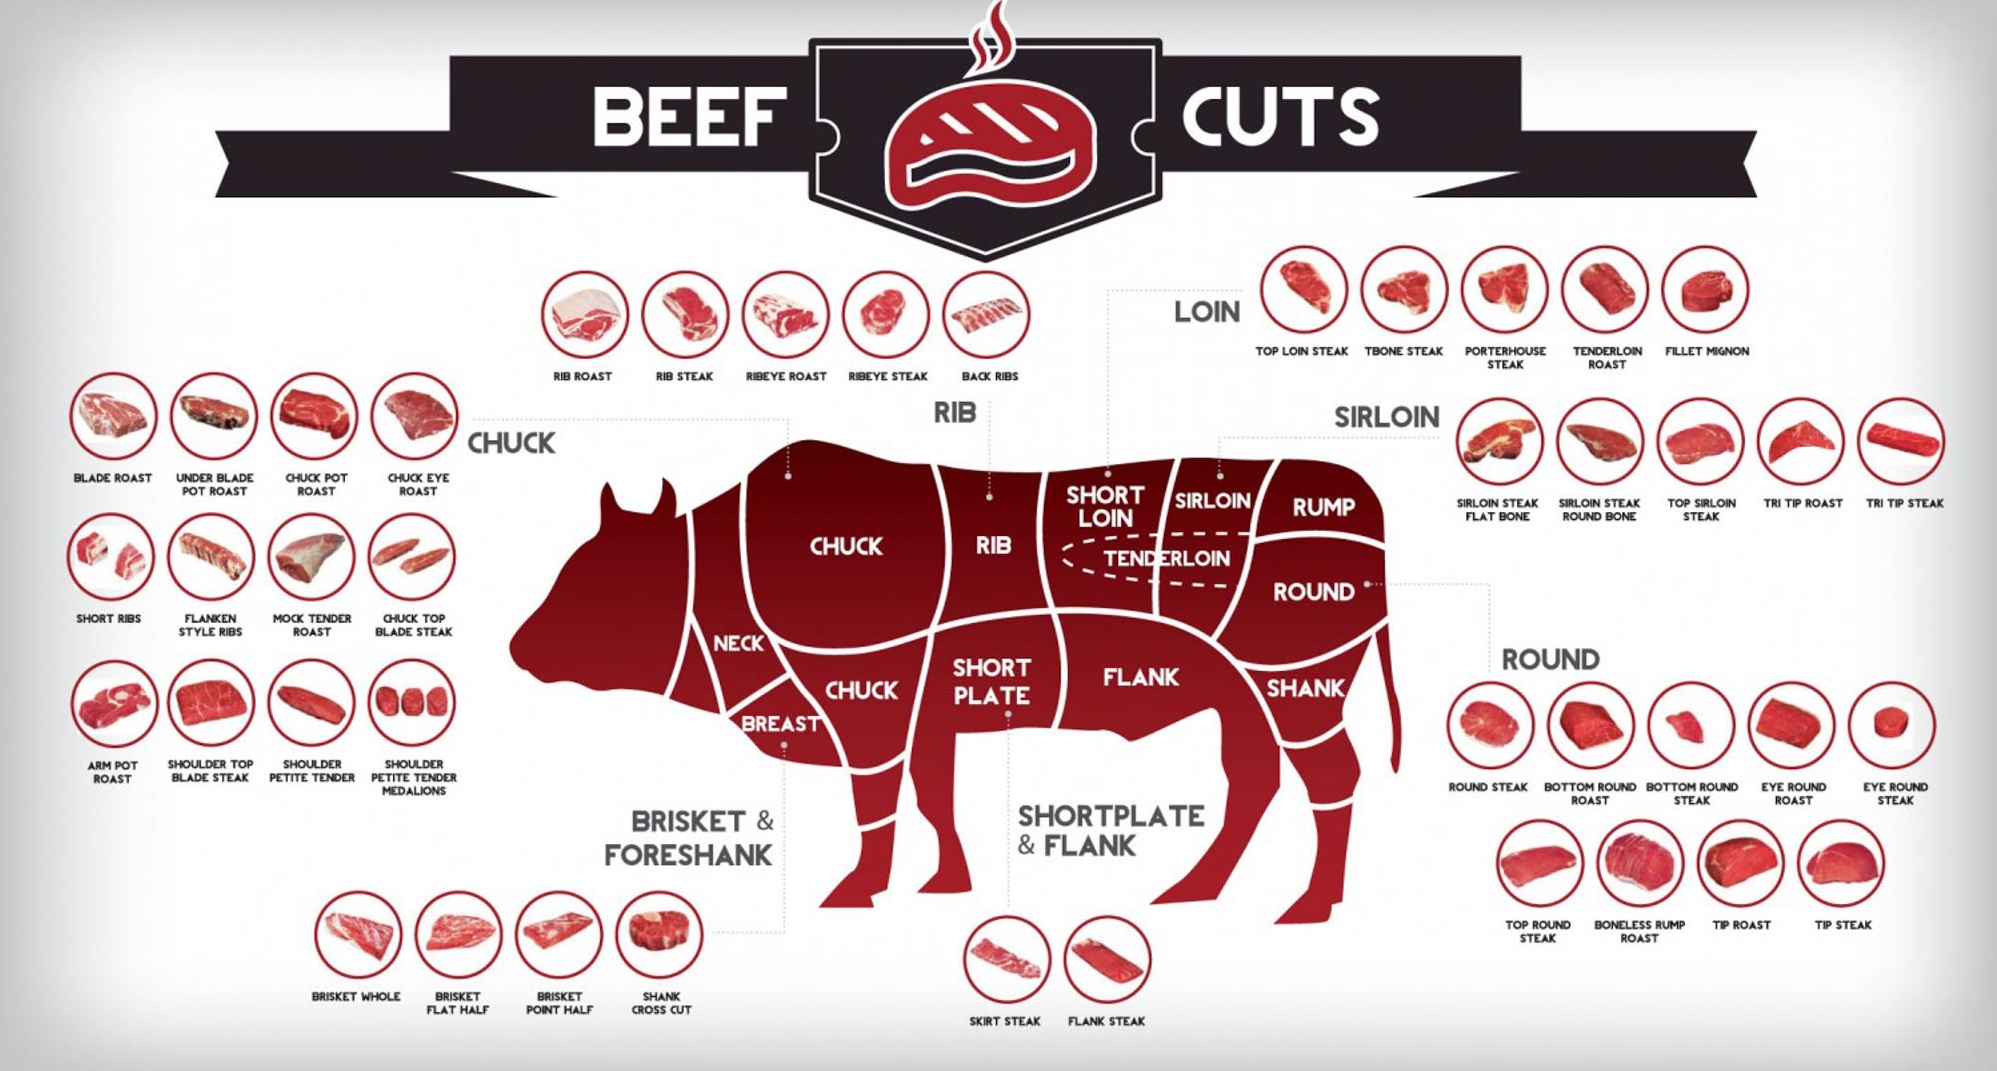 What cut of beef does Arby's use? - Foodly